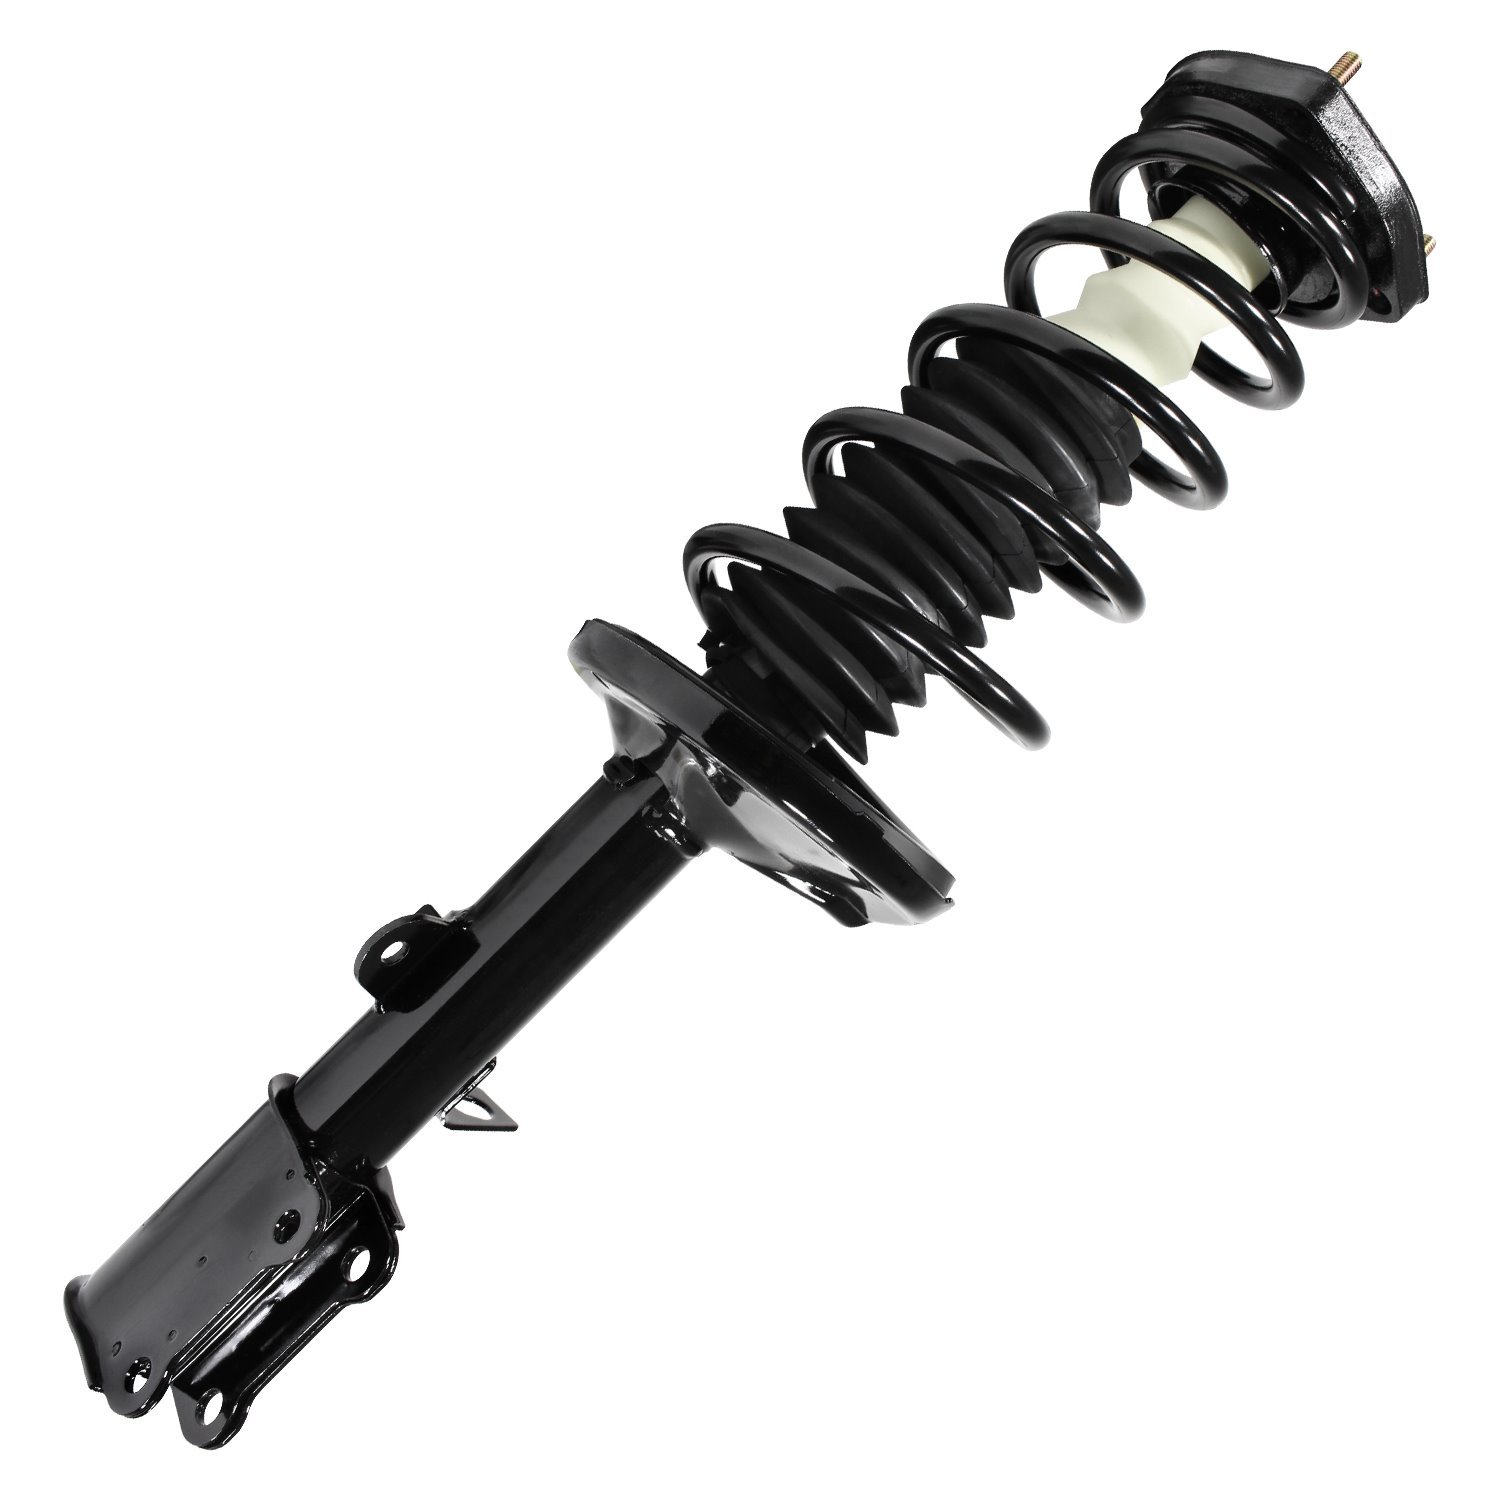 15052 Suspension Strut & Coil Spring Assembly Fits Select Chevy Prizm, Geo Prizm, Toyota Corolla